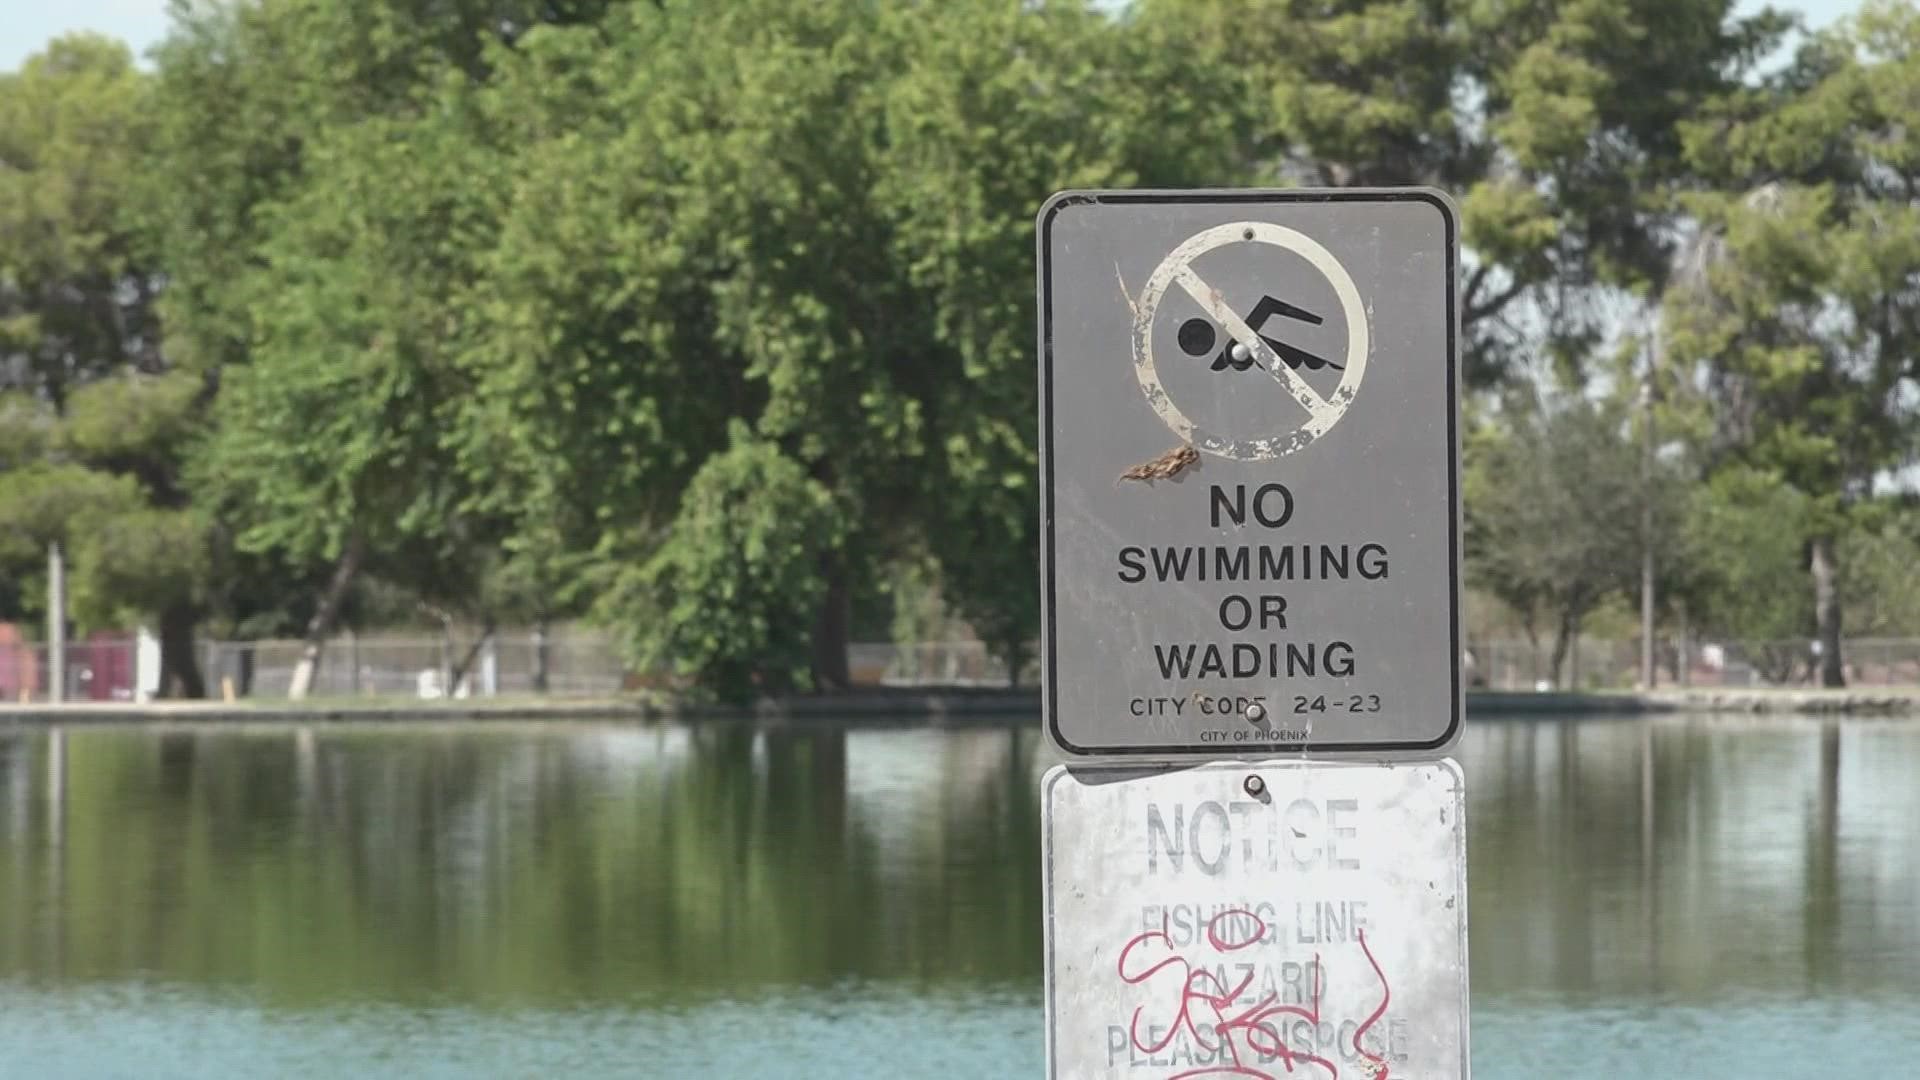 Some residents in South Phoenix say conditions at Cesar Chavez Park have started to go "downhill" due to more littering and dirty pond water.